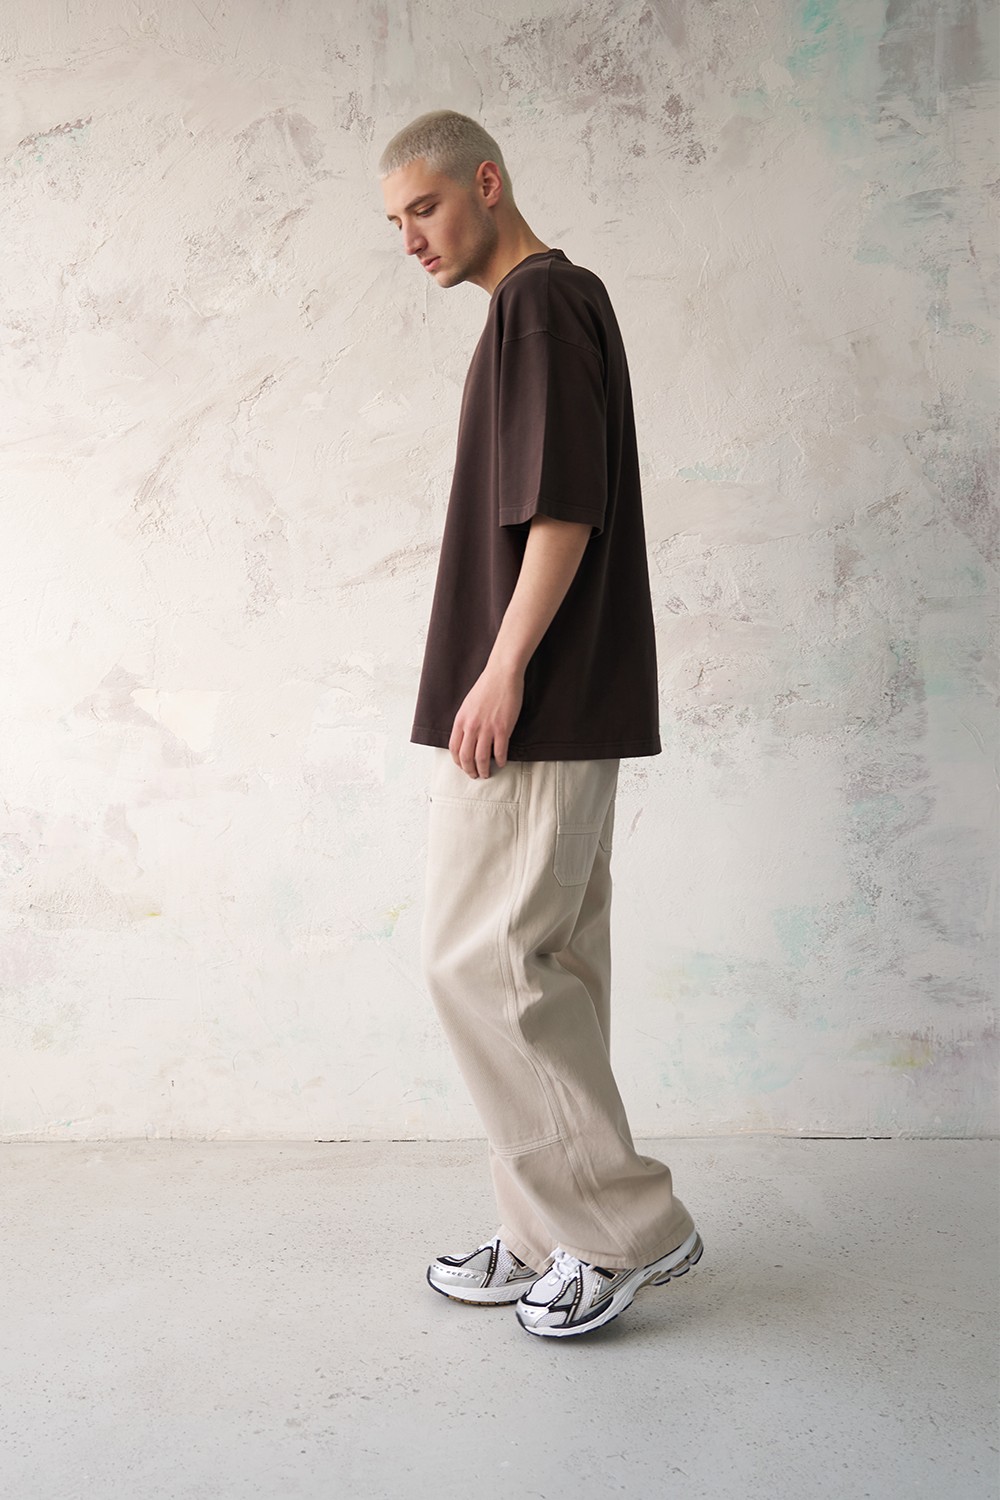 Sohigh Blank Oversized T-Shirt - Washed Brown